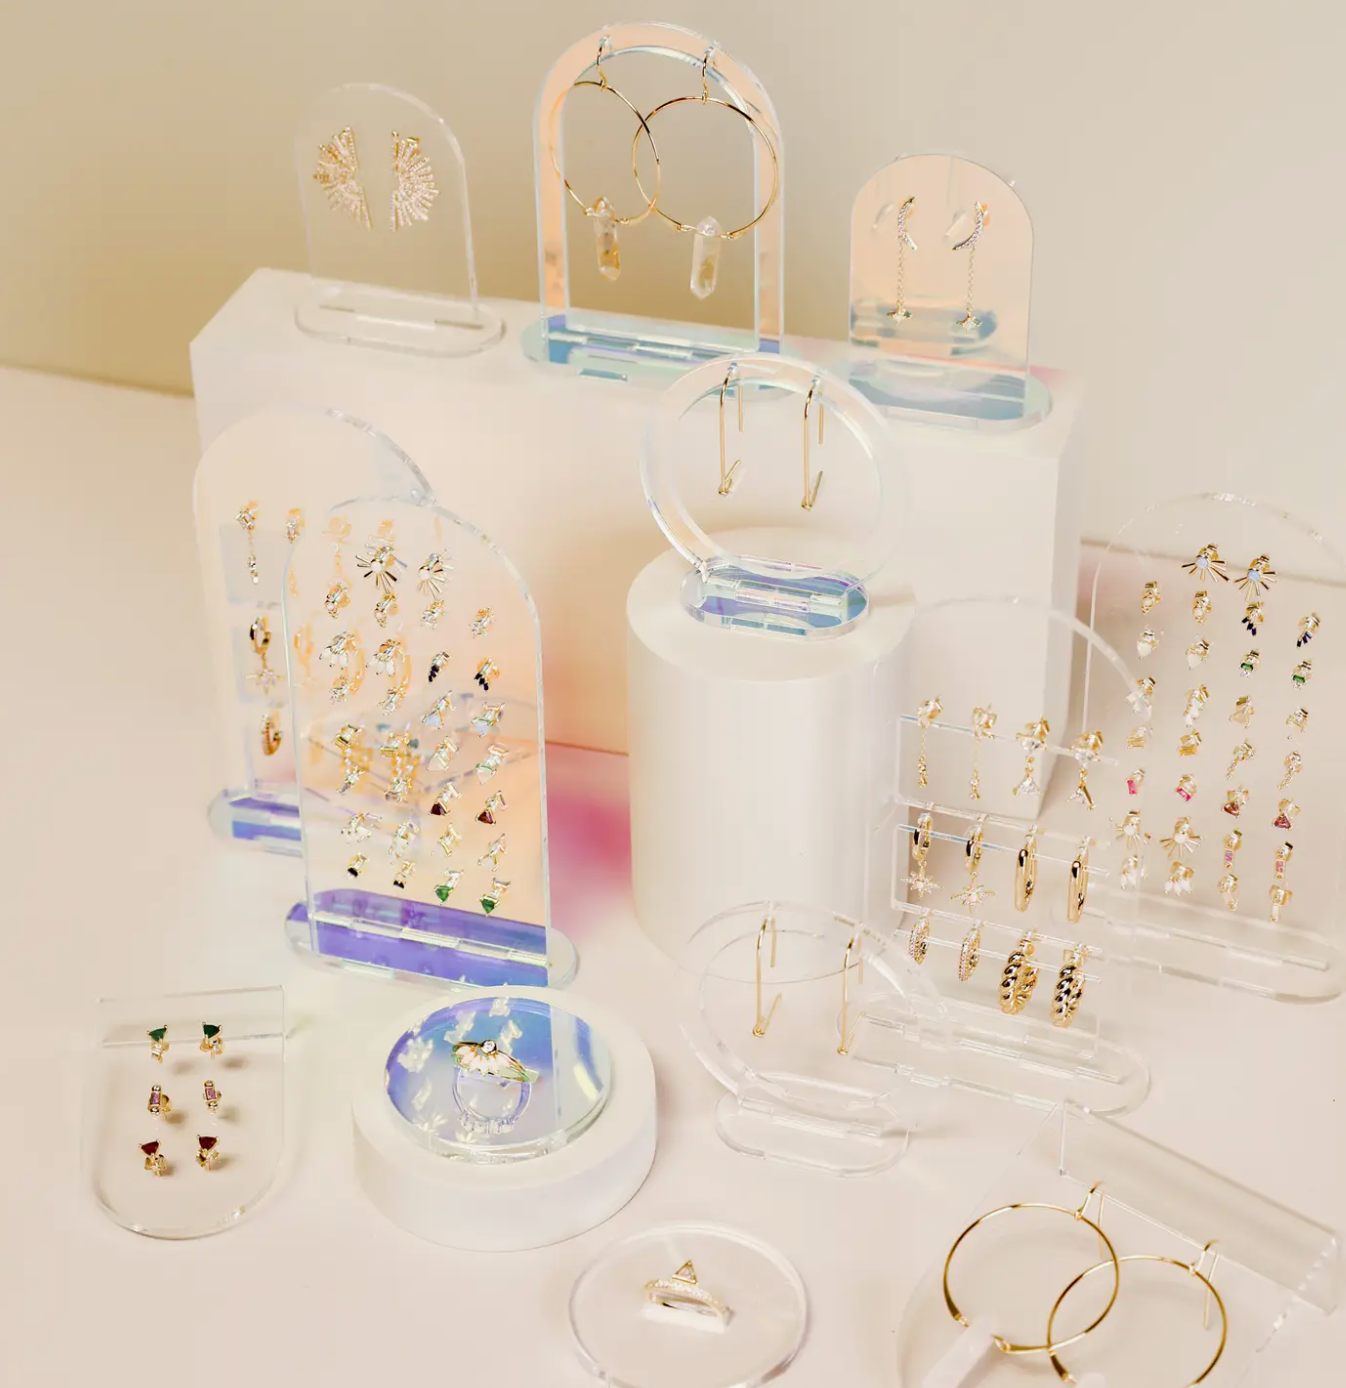 Iridescent Earring Display Stacked Arch